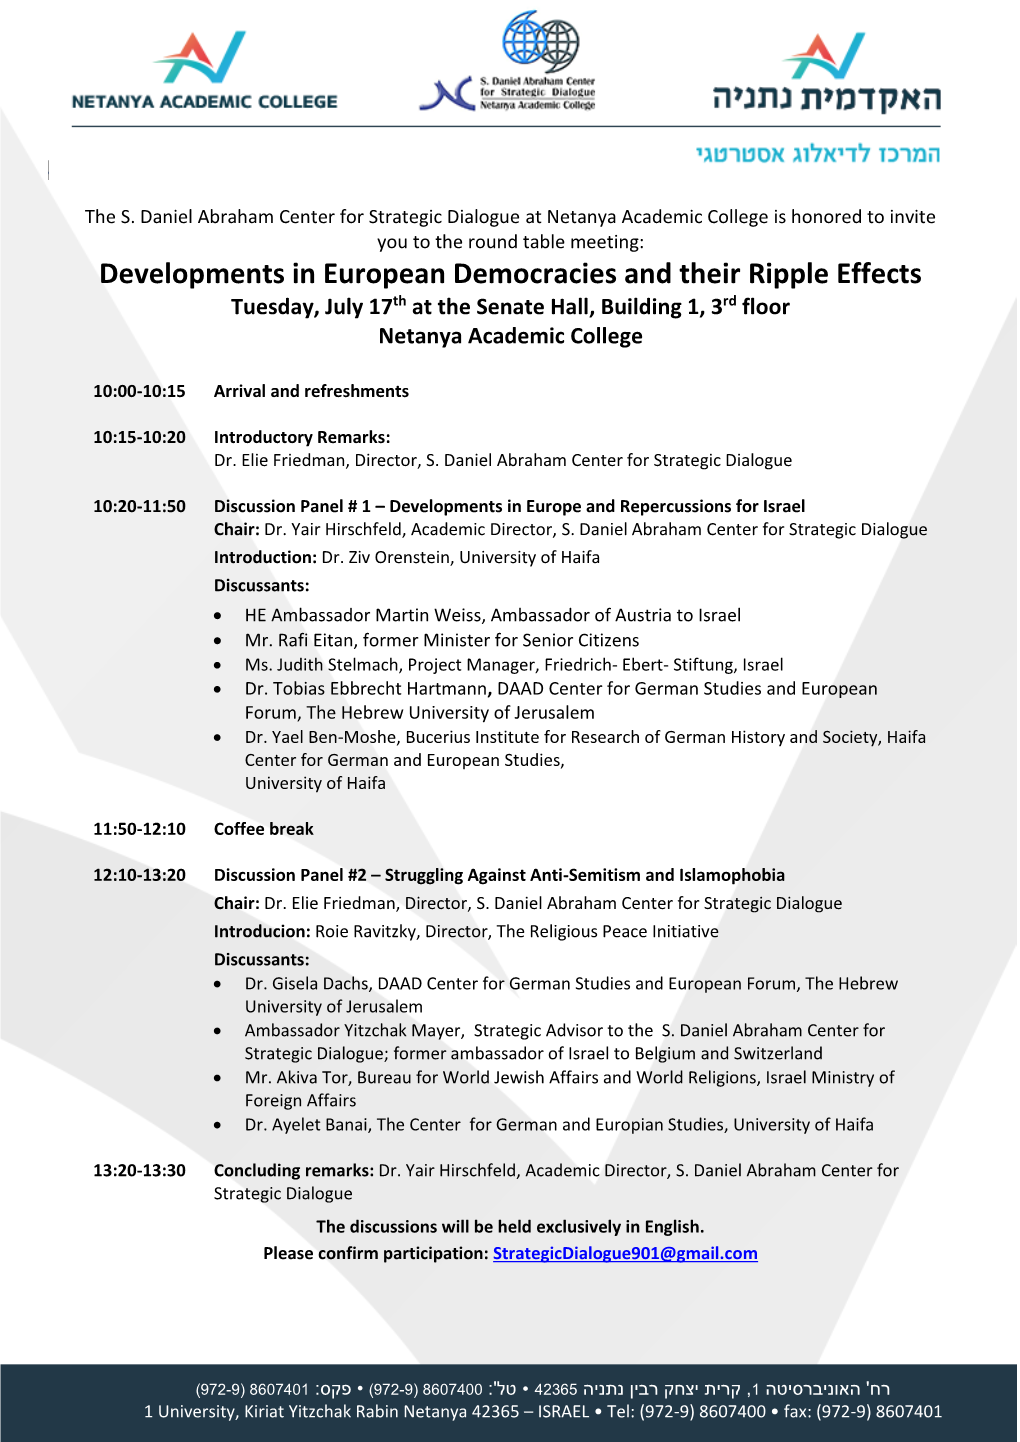 Developments in European Democracies and Their Ripple Effects Tuesday, July 17Th at the Senate Hall, Building 1, 3Rd Floor Netanya Academic College